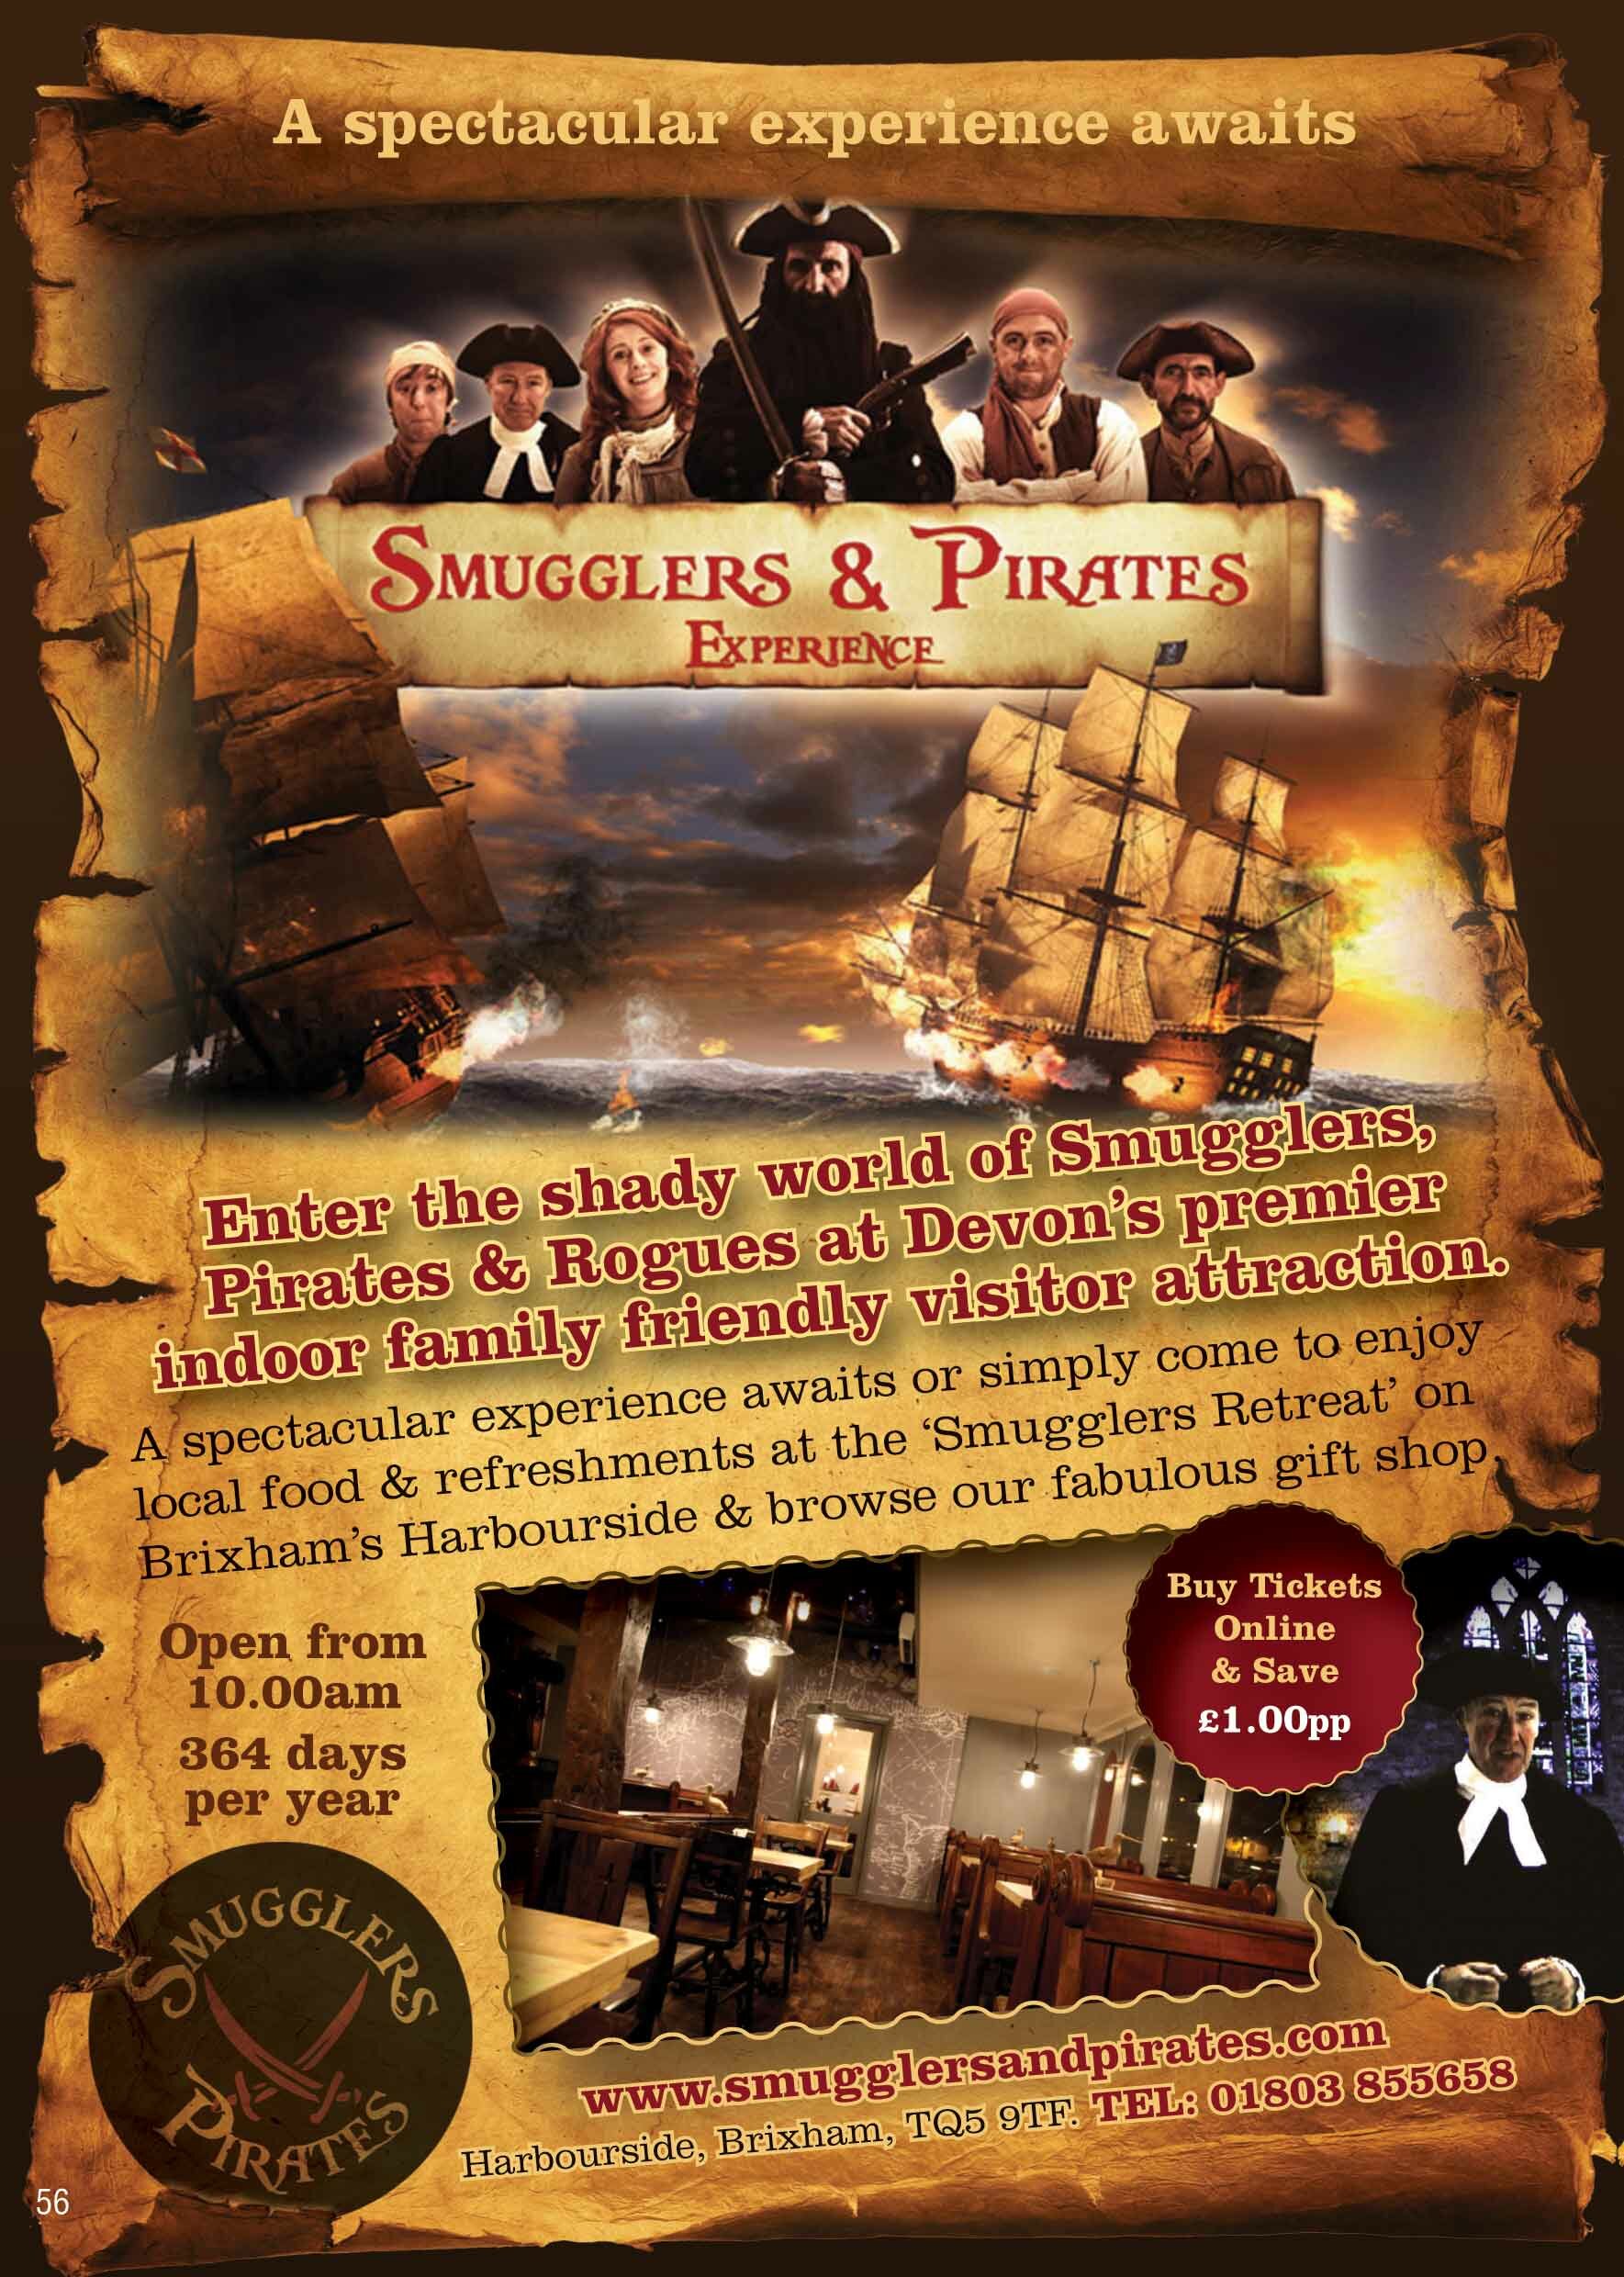 The Smugglers & Pirates Experience